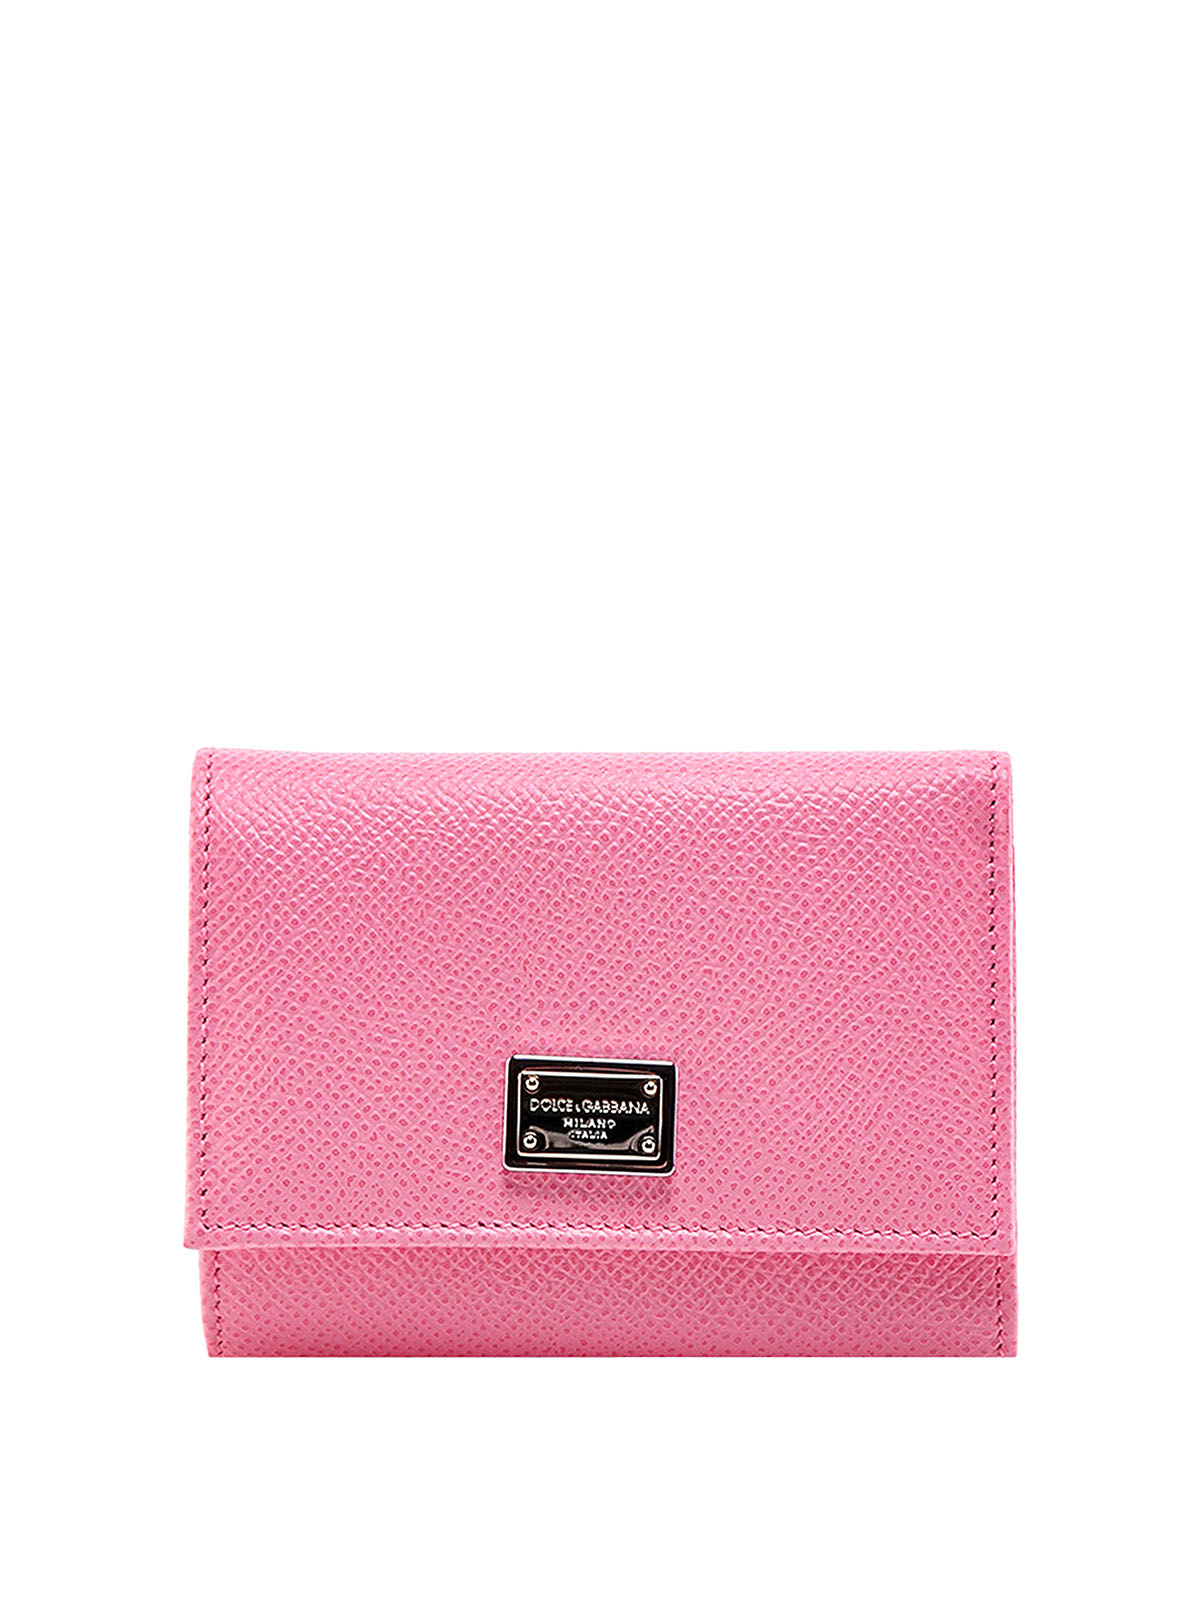 Dolce & Gabbana Leather Wallet With Iconic Logo Detail In Rosado